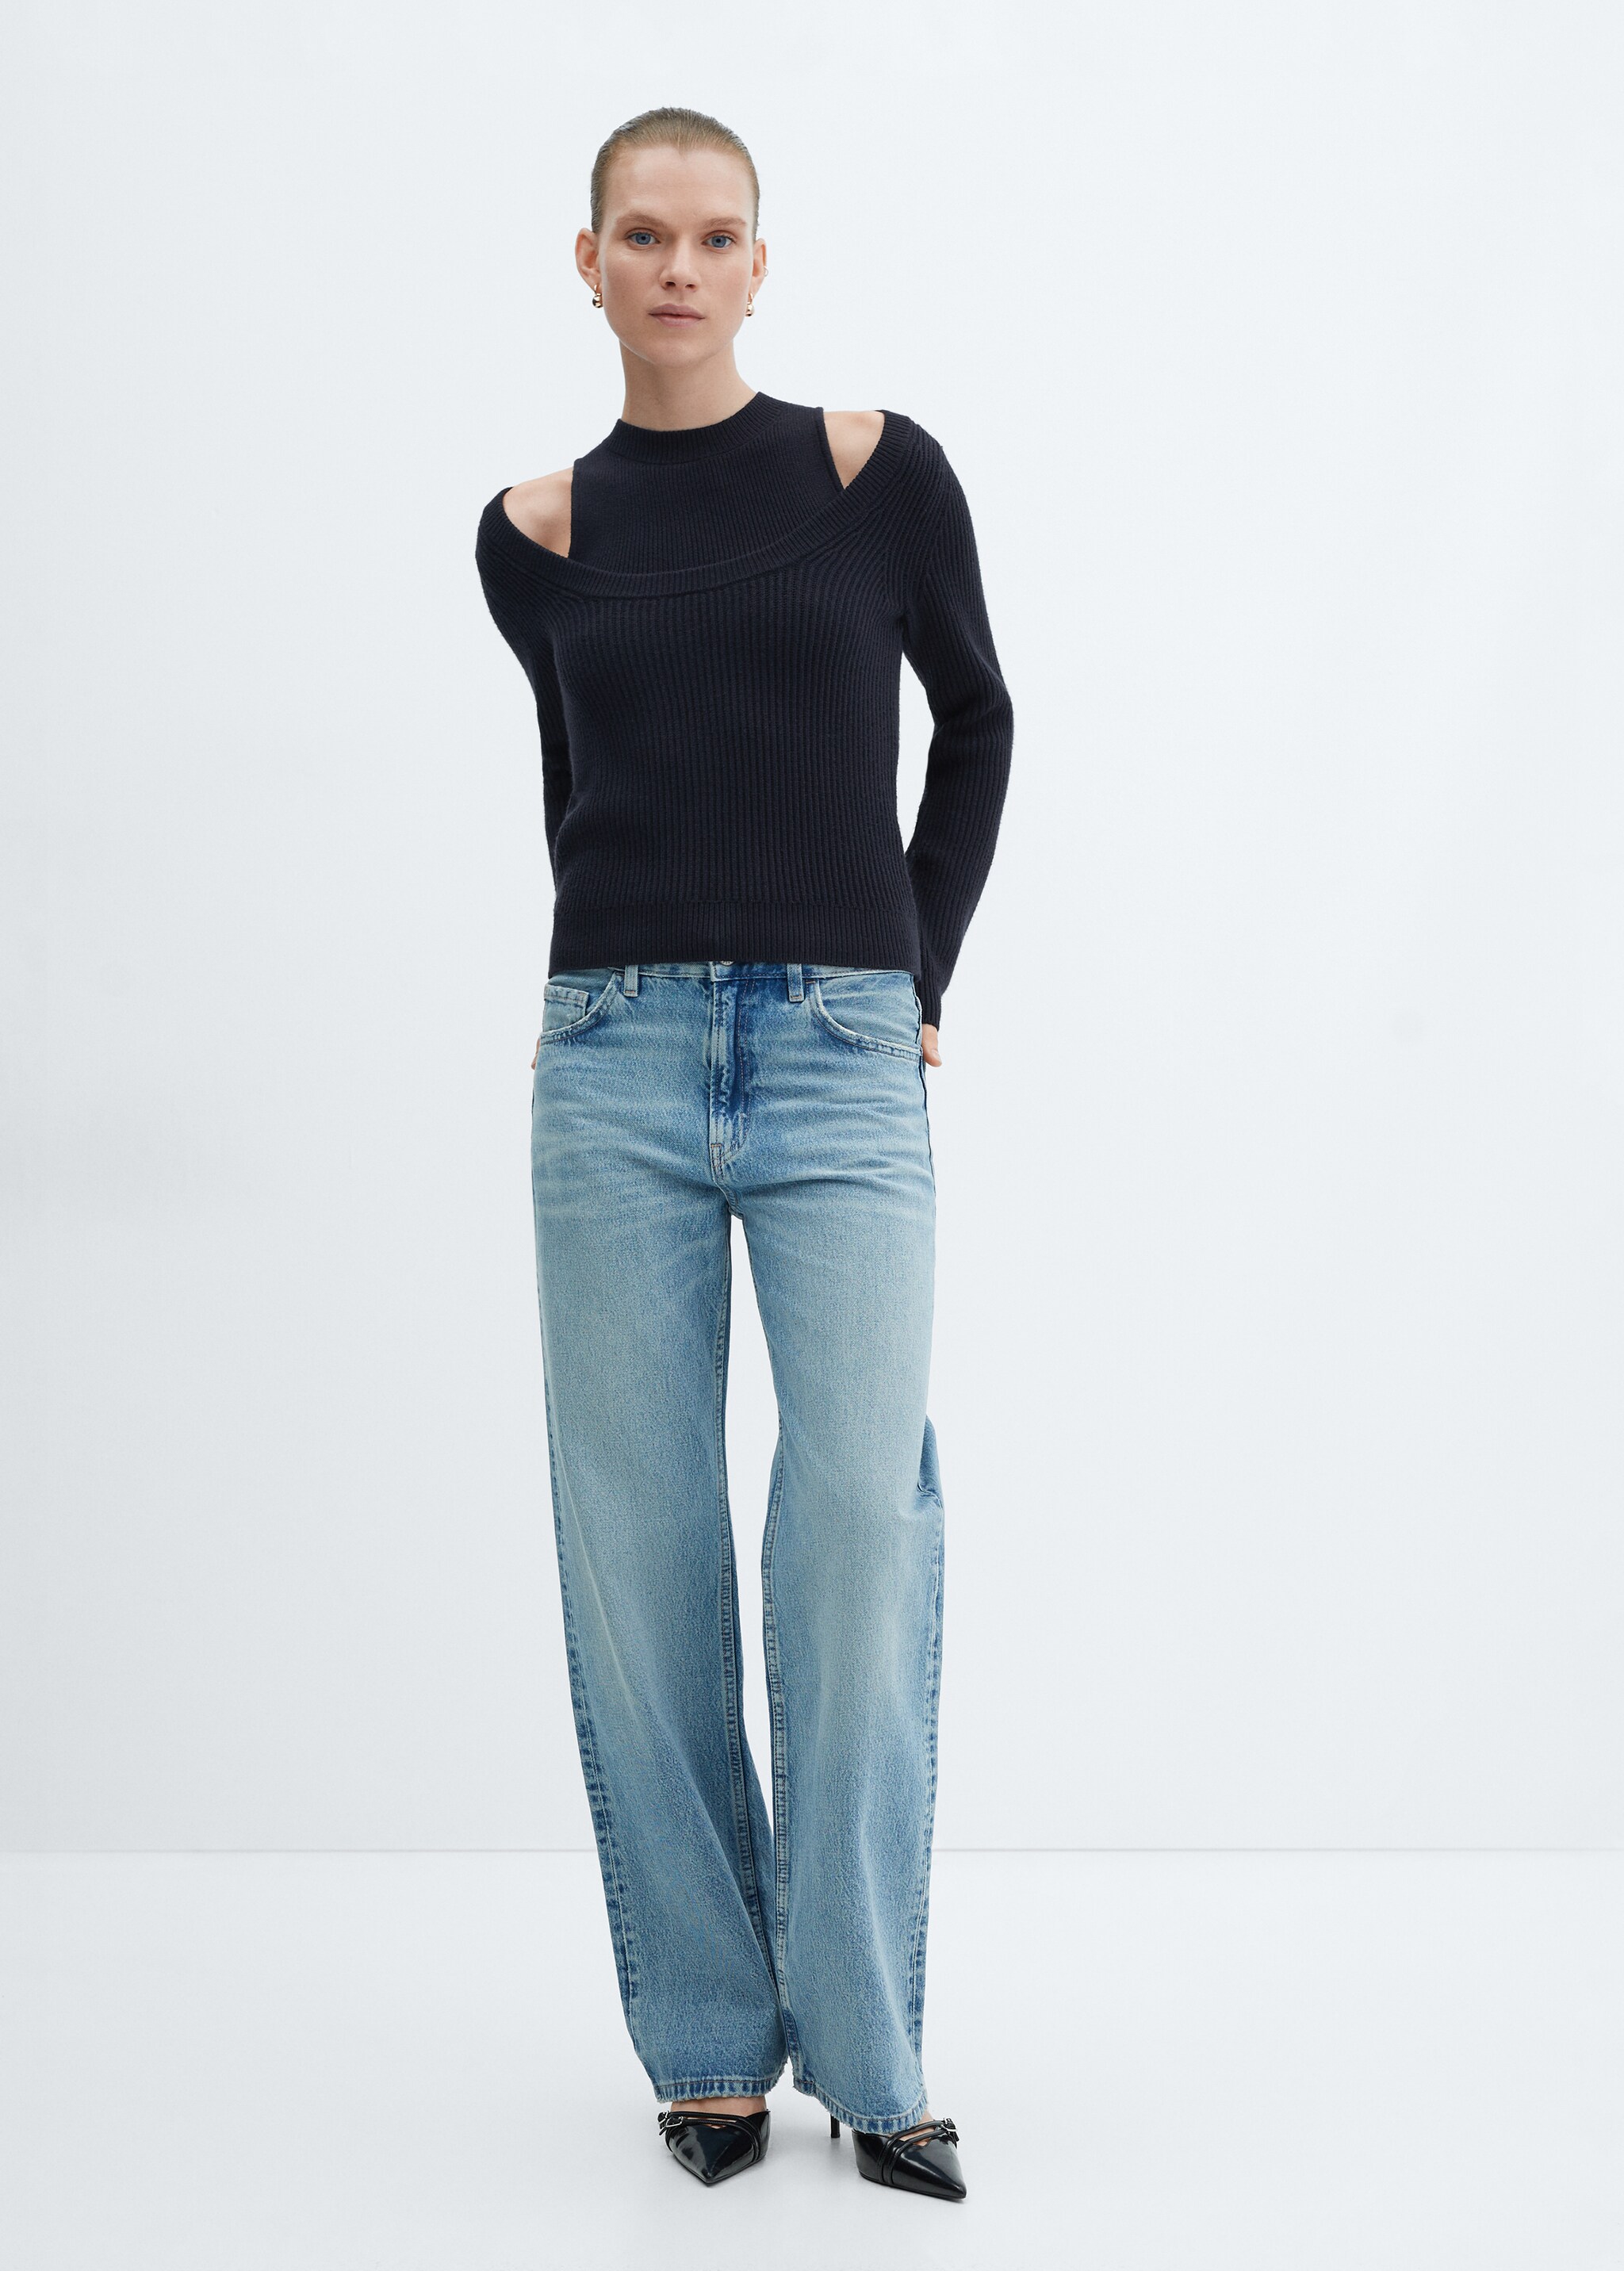 Ribbed knit top - General plane